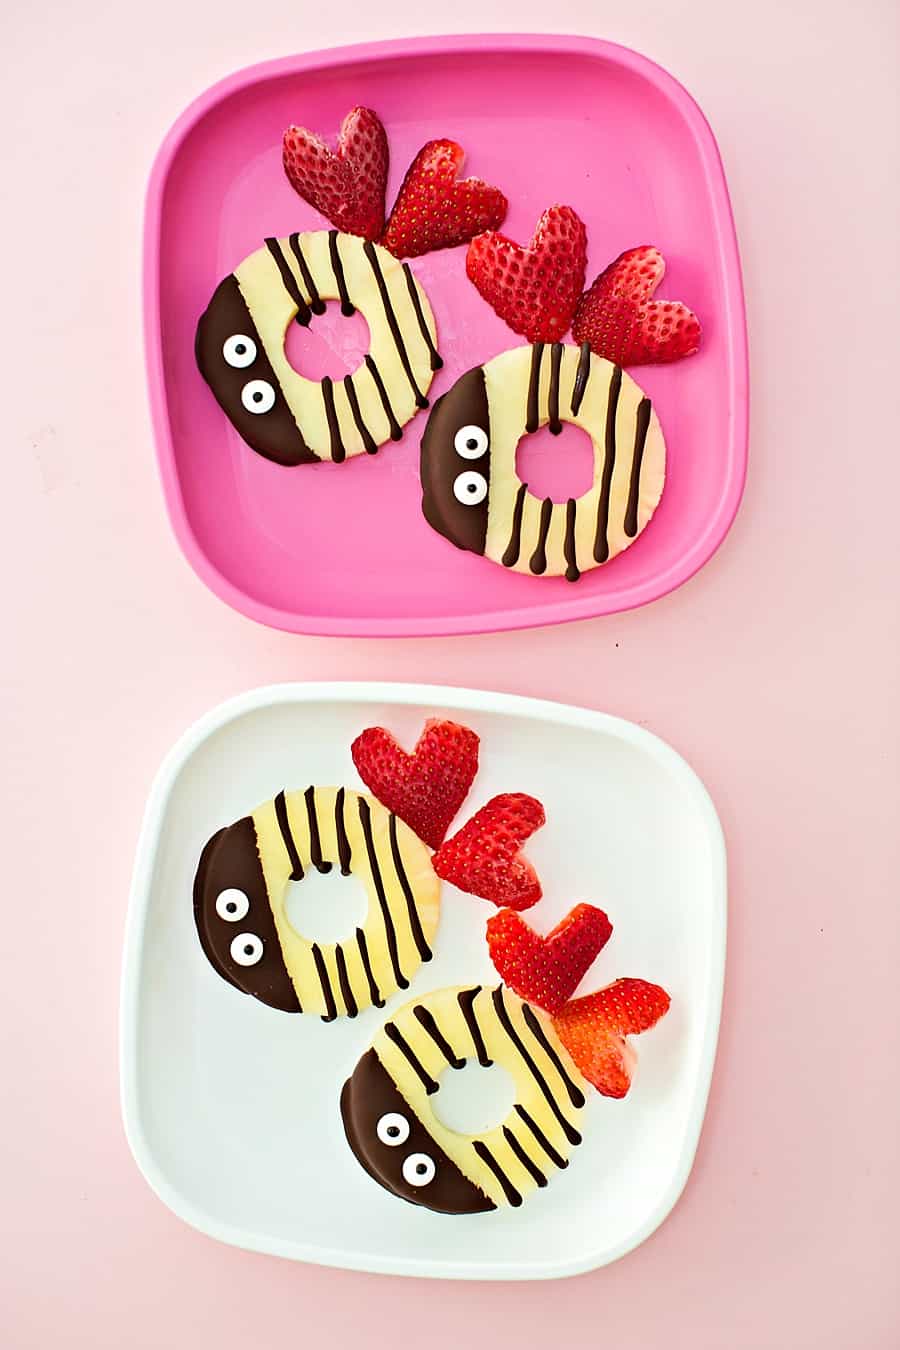 Sweeten up your kids' day or make a cute Valentine's Day snack this year with our Valentine Bee Mine Fruit Snack For Kids!